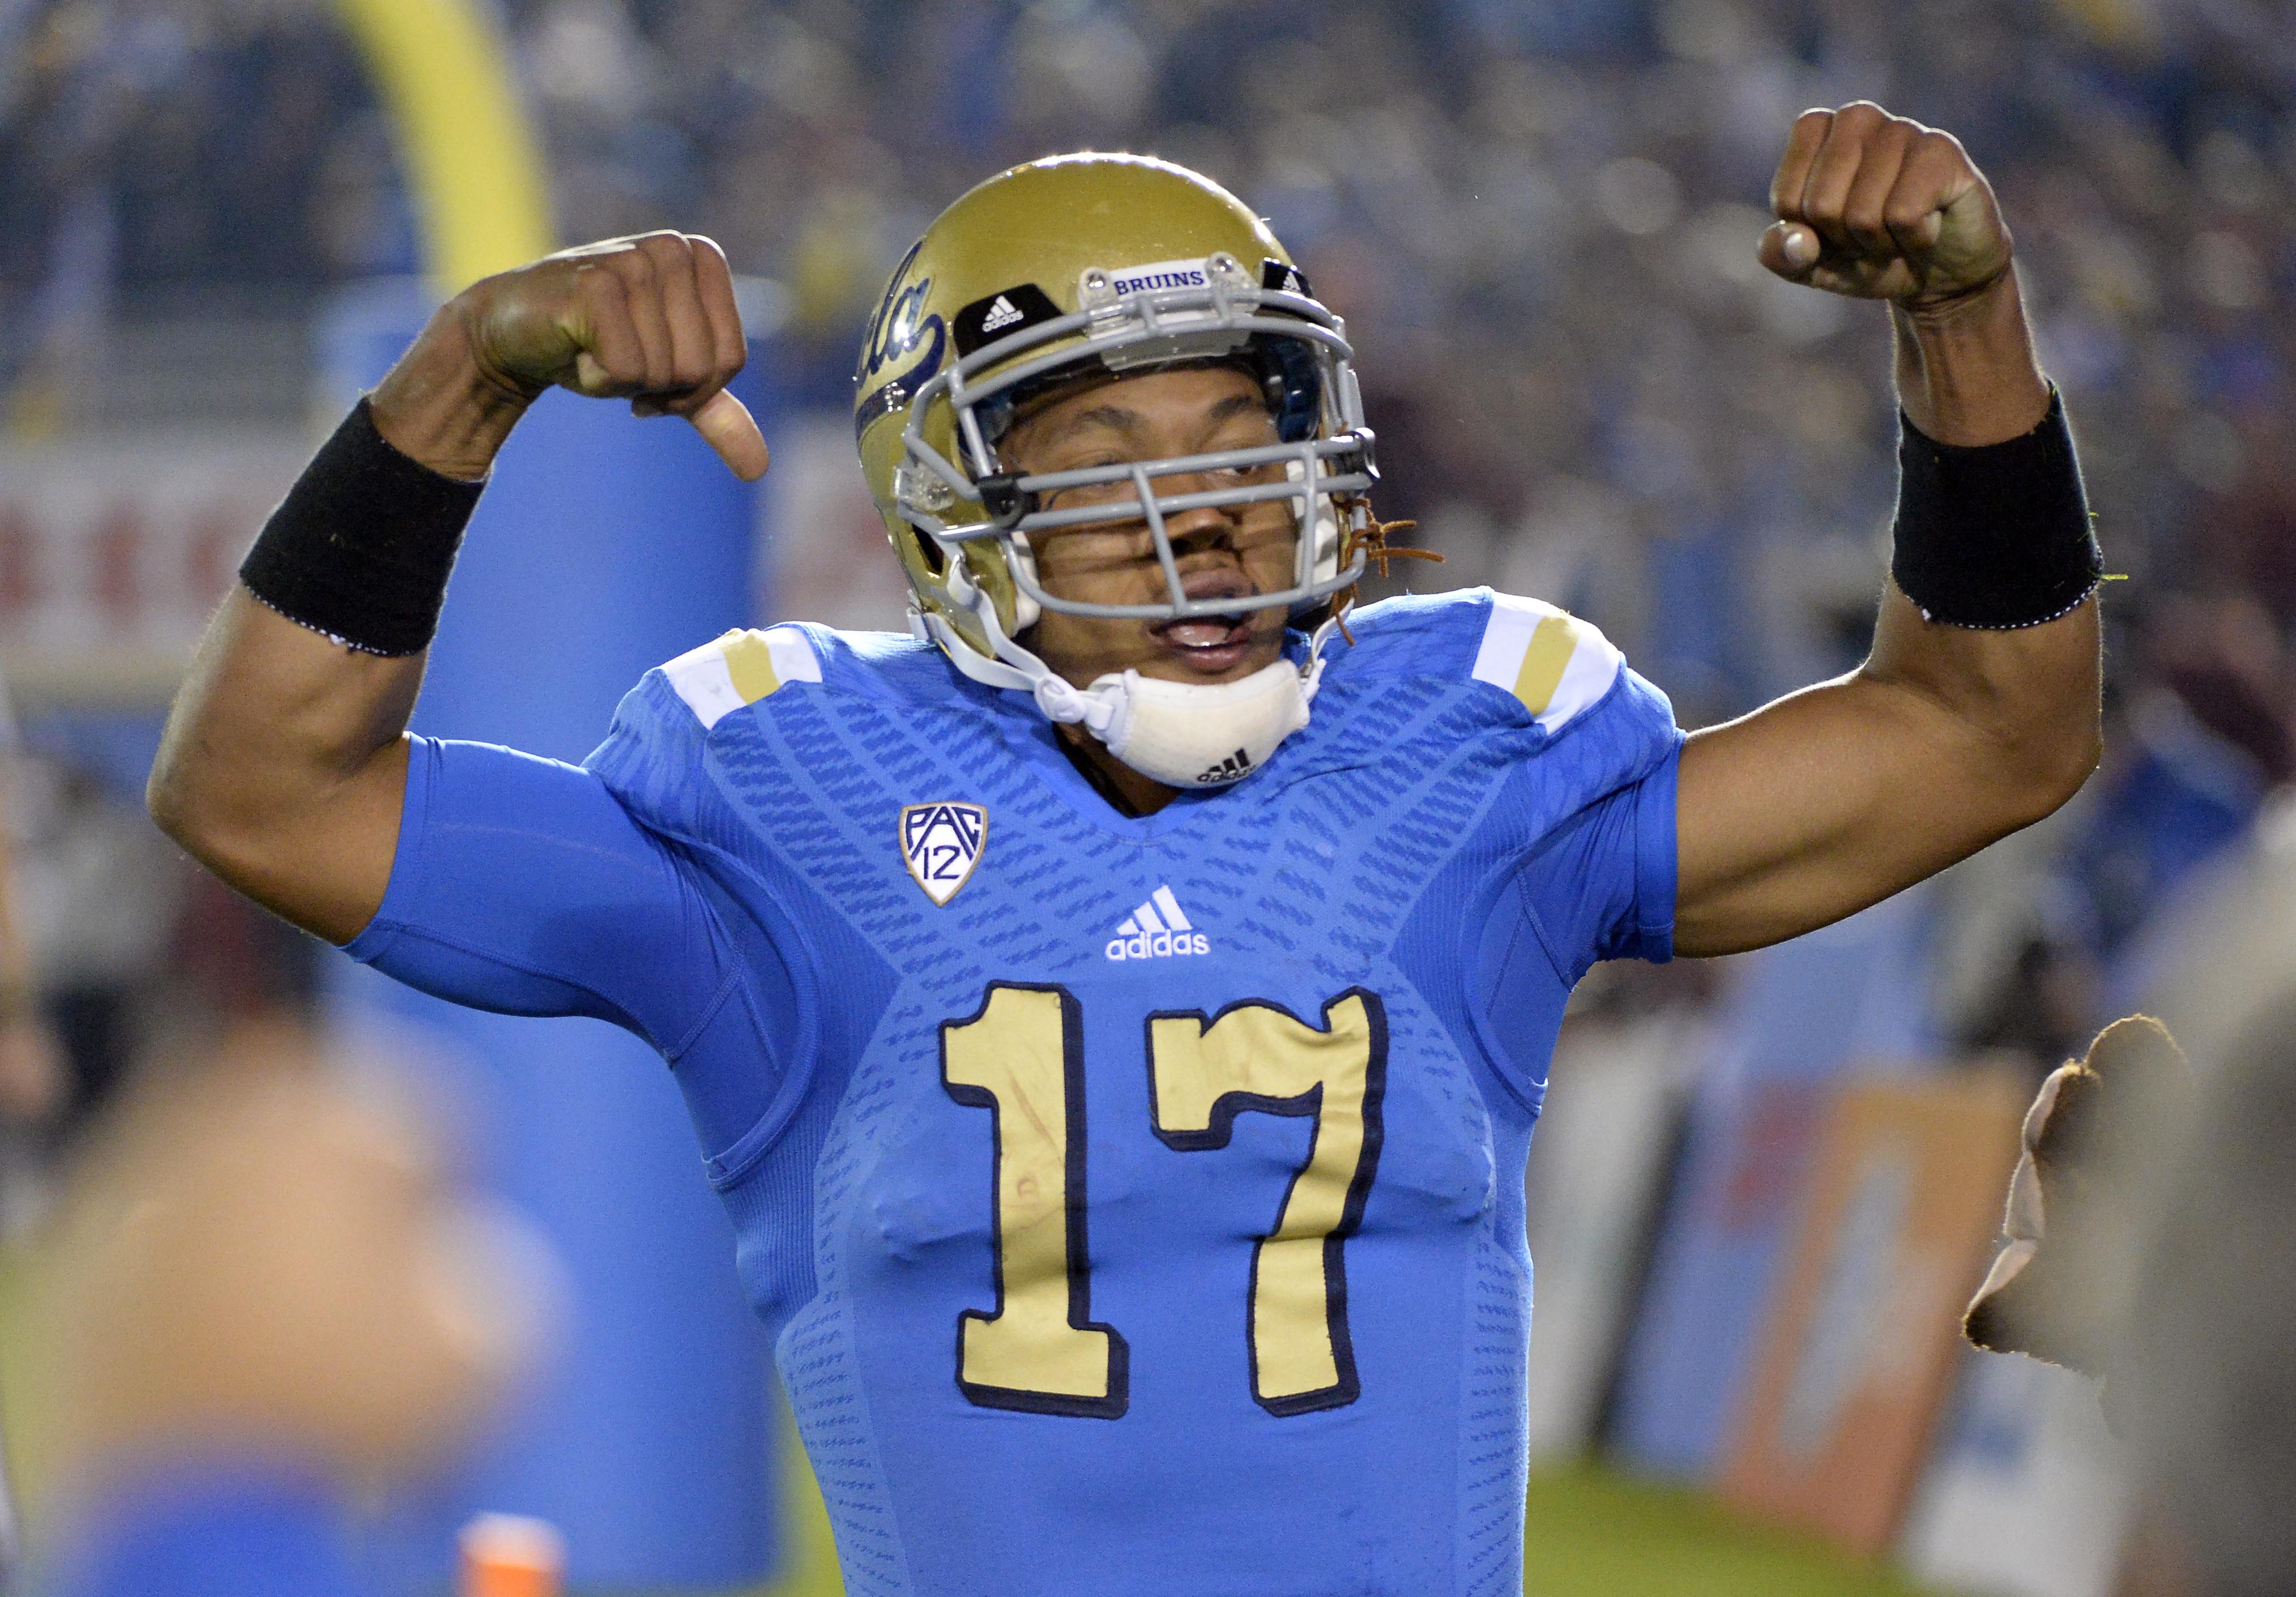 Nov 22, 2014; Pasadena, CA, USA; UCLA Bruins quarterback Brett Hundley (17) celebrates after scoring a touchdown against the Southern California Trojans during the second half at the Rose Bowl. (Richard Mackson-USA TODAY Sports)